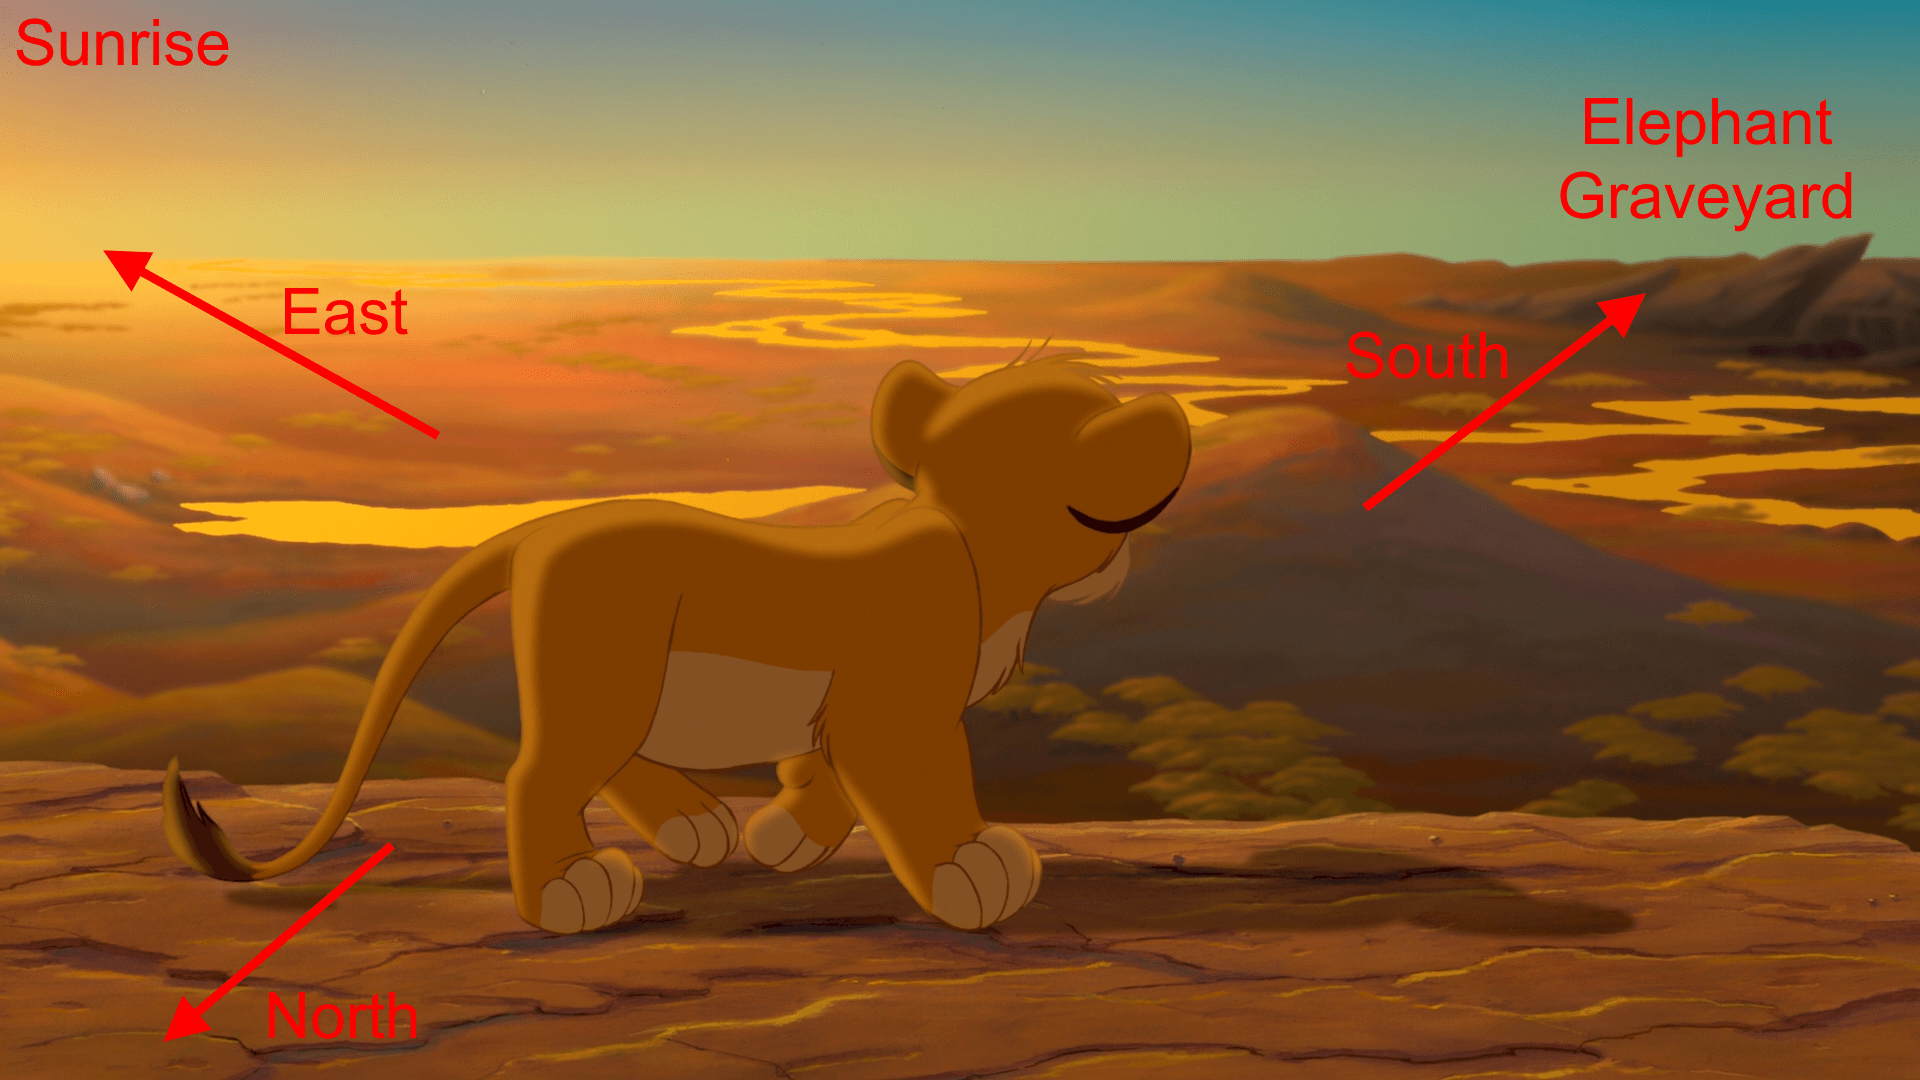 In The Lion King (1994) Scar asks Simba if Mufasa showed him whats